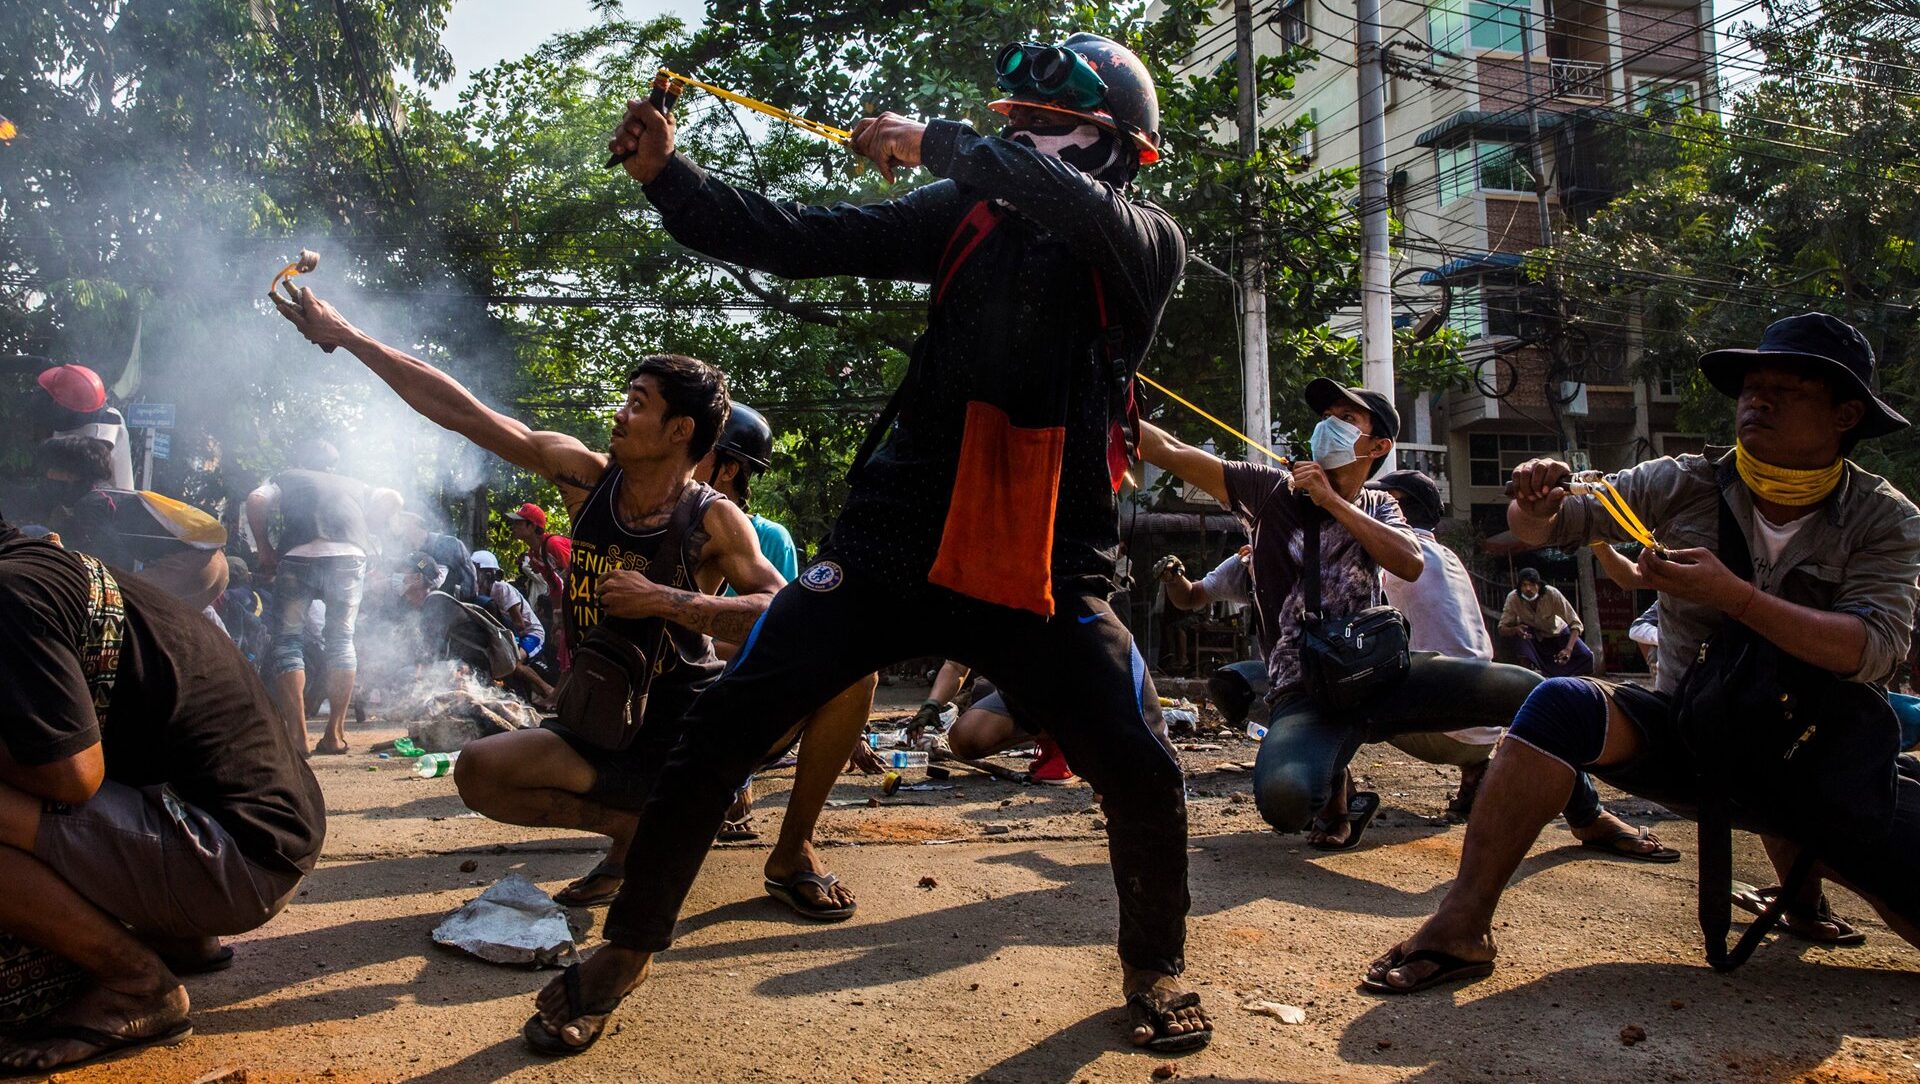 World Press Photo - Contest Southeast-Asia-and-Oceania, Fionde (Anonimo)